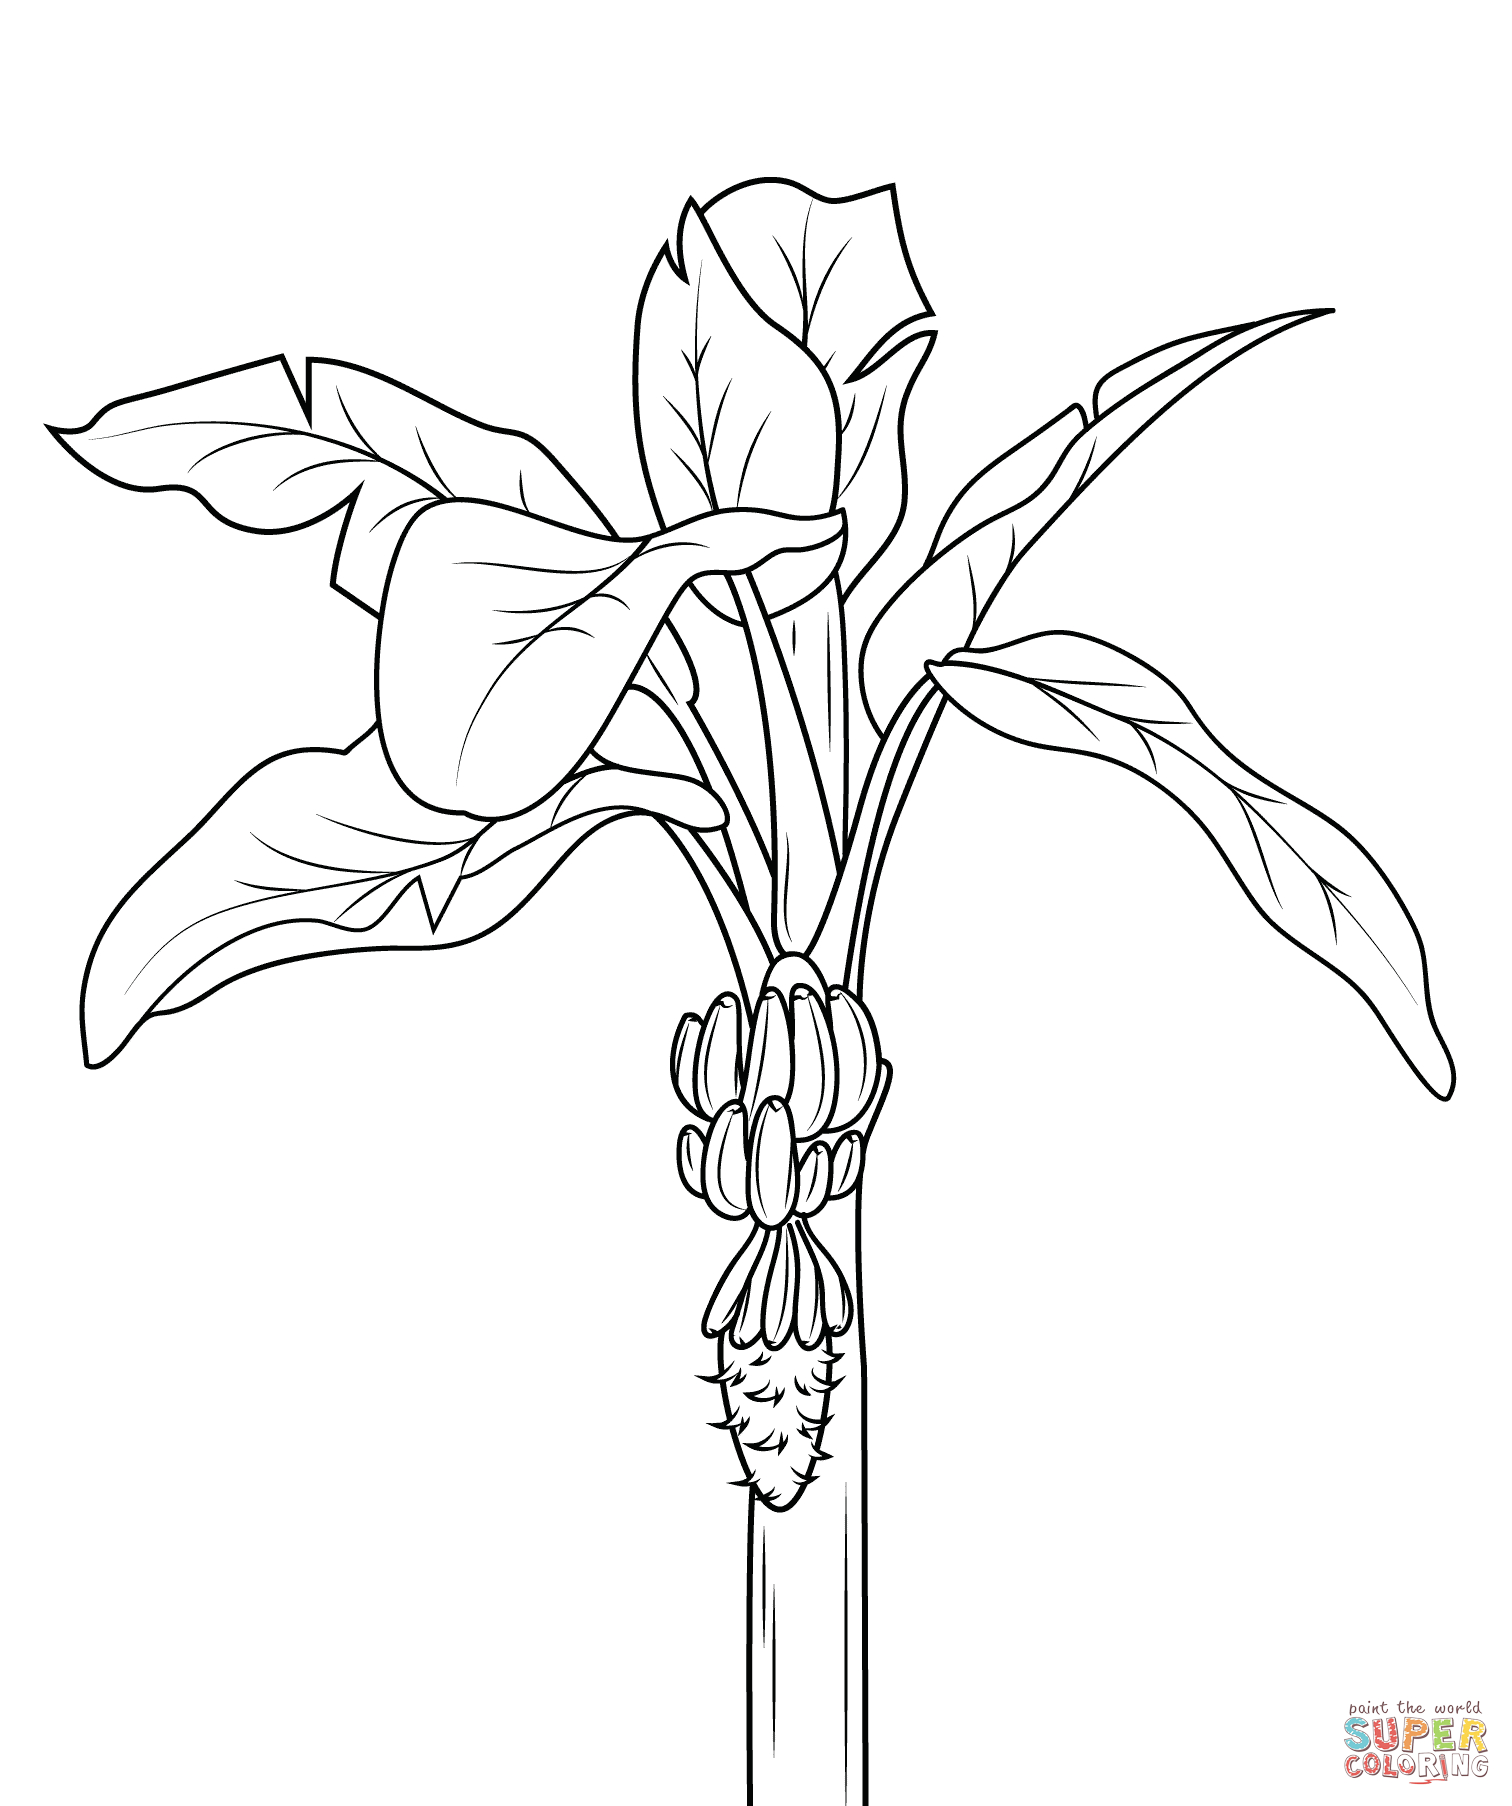 Banana Split Coloring Page Banana Tree Coloring Page Gorgeous Bananas Pages Free Intended For 5